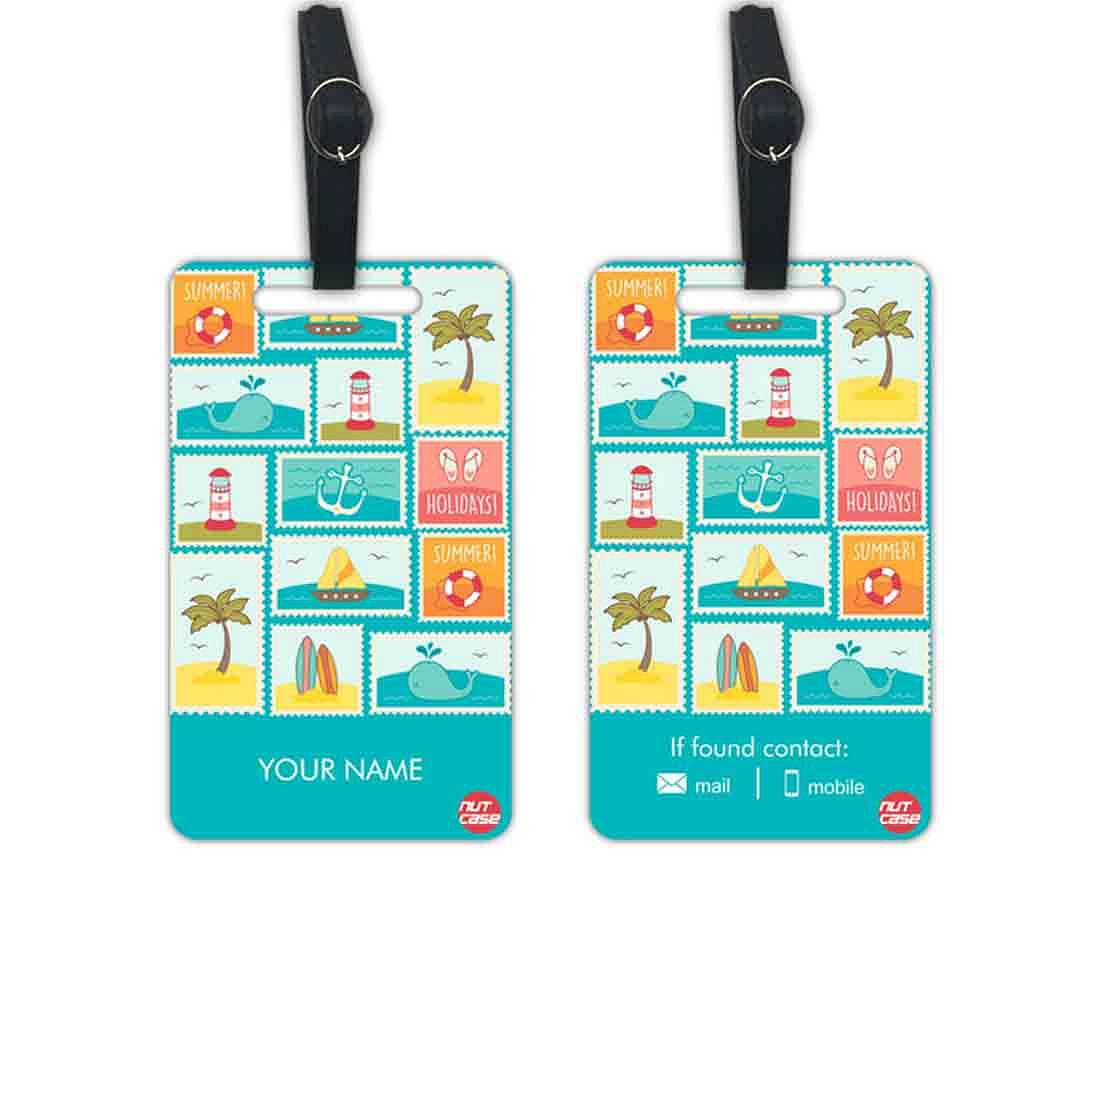 Cool Customized Travel Luggage Tag - Add your Name - Set of 2 Nutcase